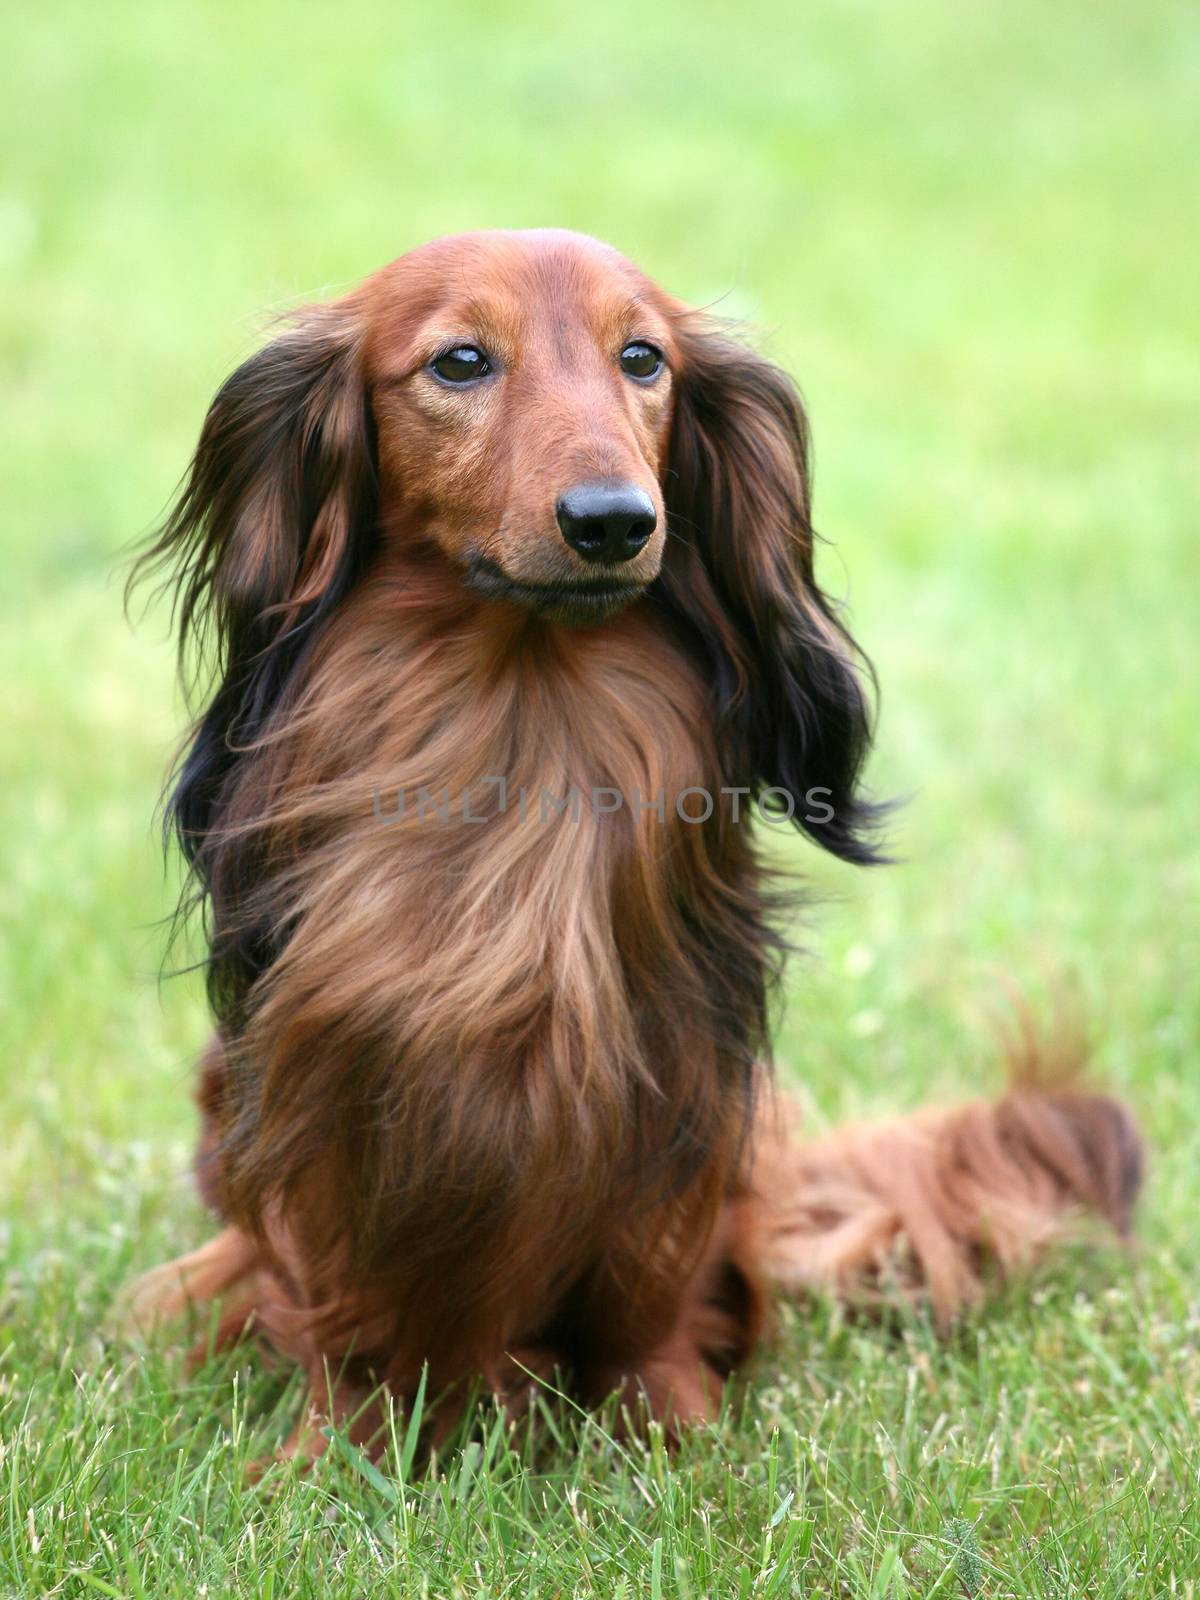 Dachshund Standard Long-haired on a green grass by CaptureLight